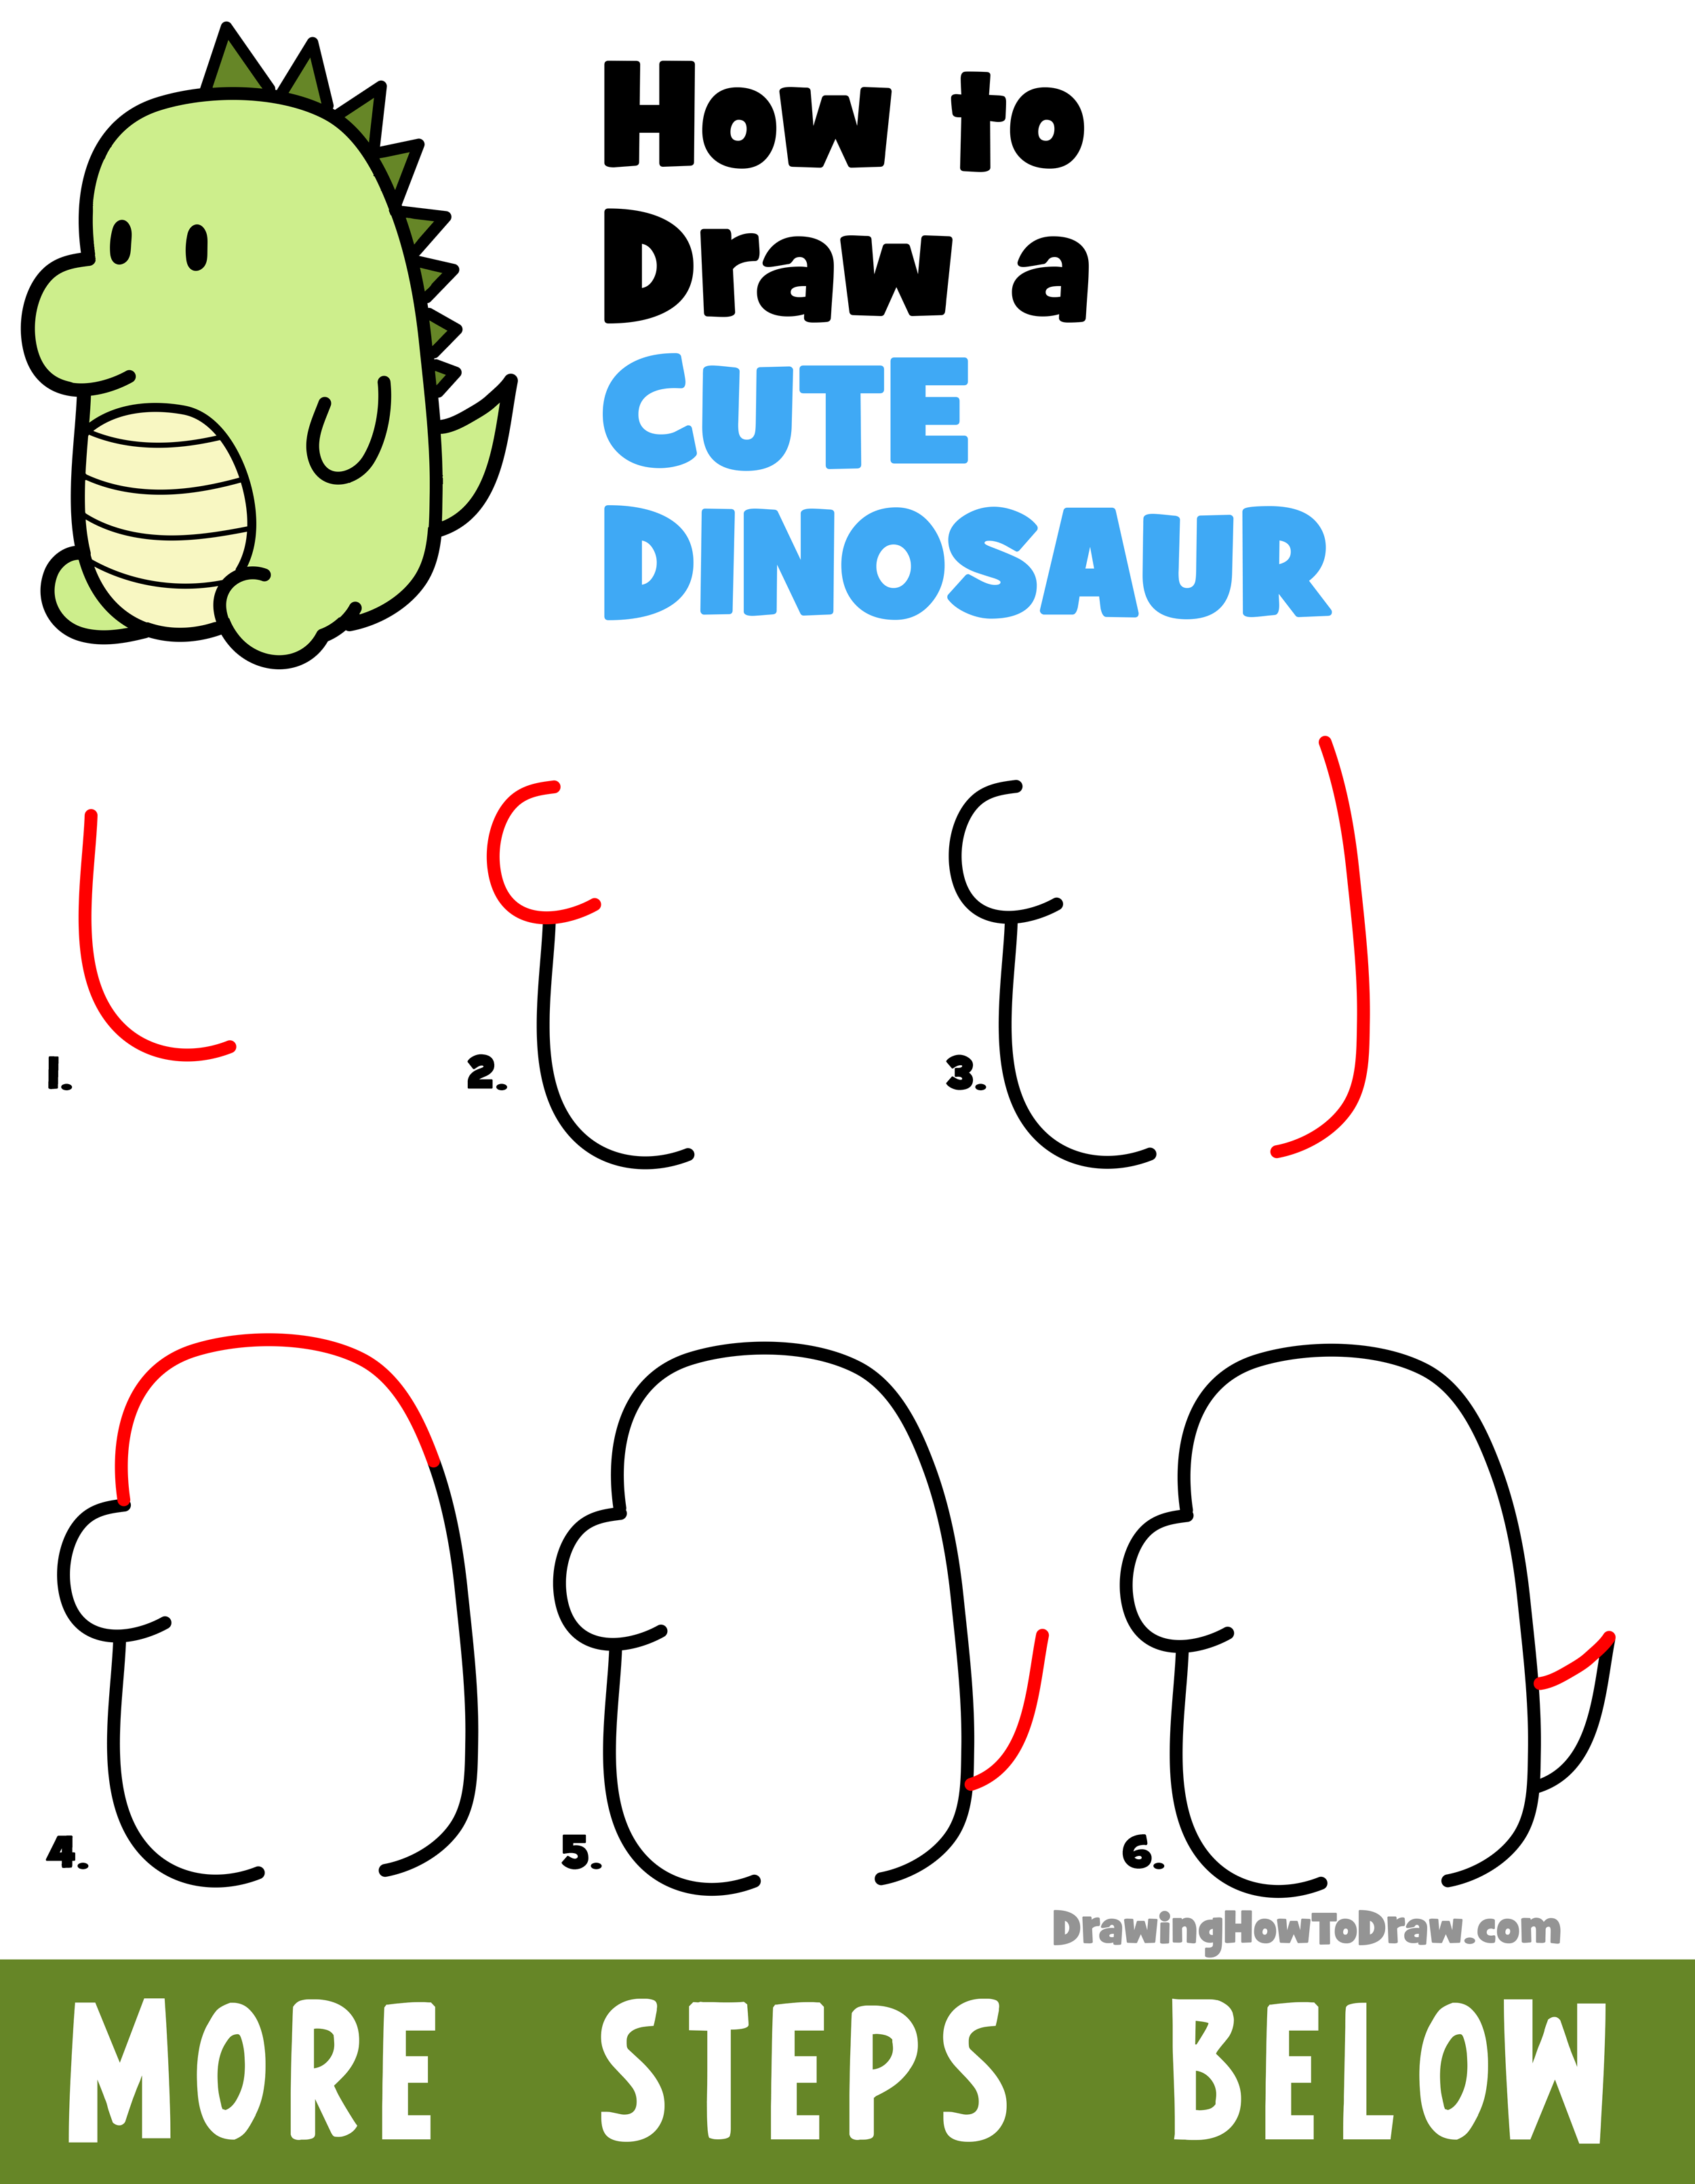 Kids Drawing Book: The Drawing Book for Kids Drawing Book, Draw Step by  Step guide (Animal, Birds, Fruits)